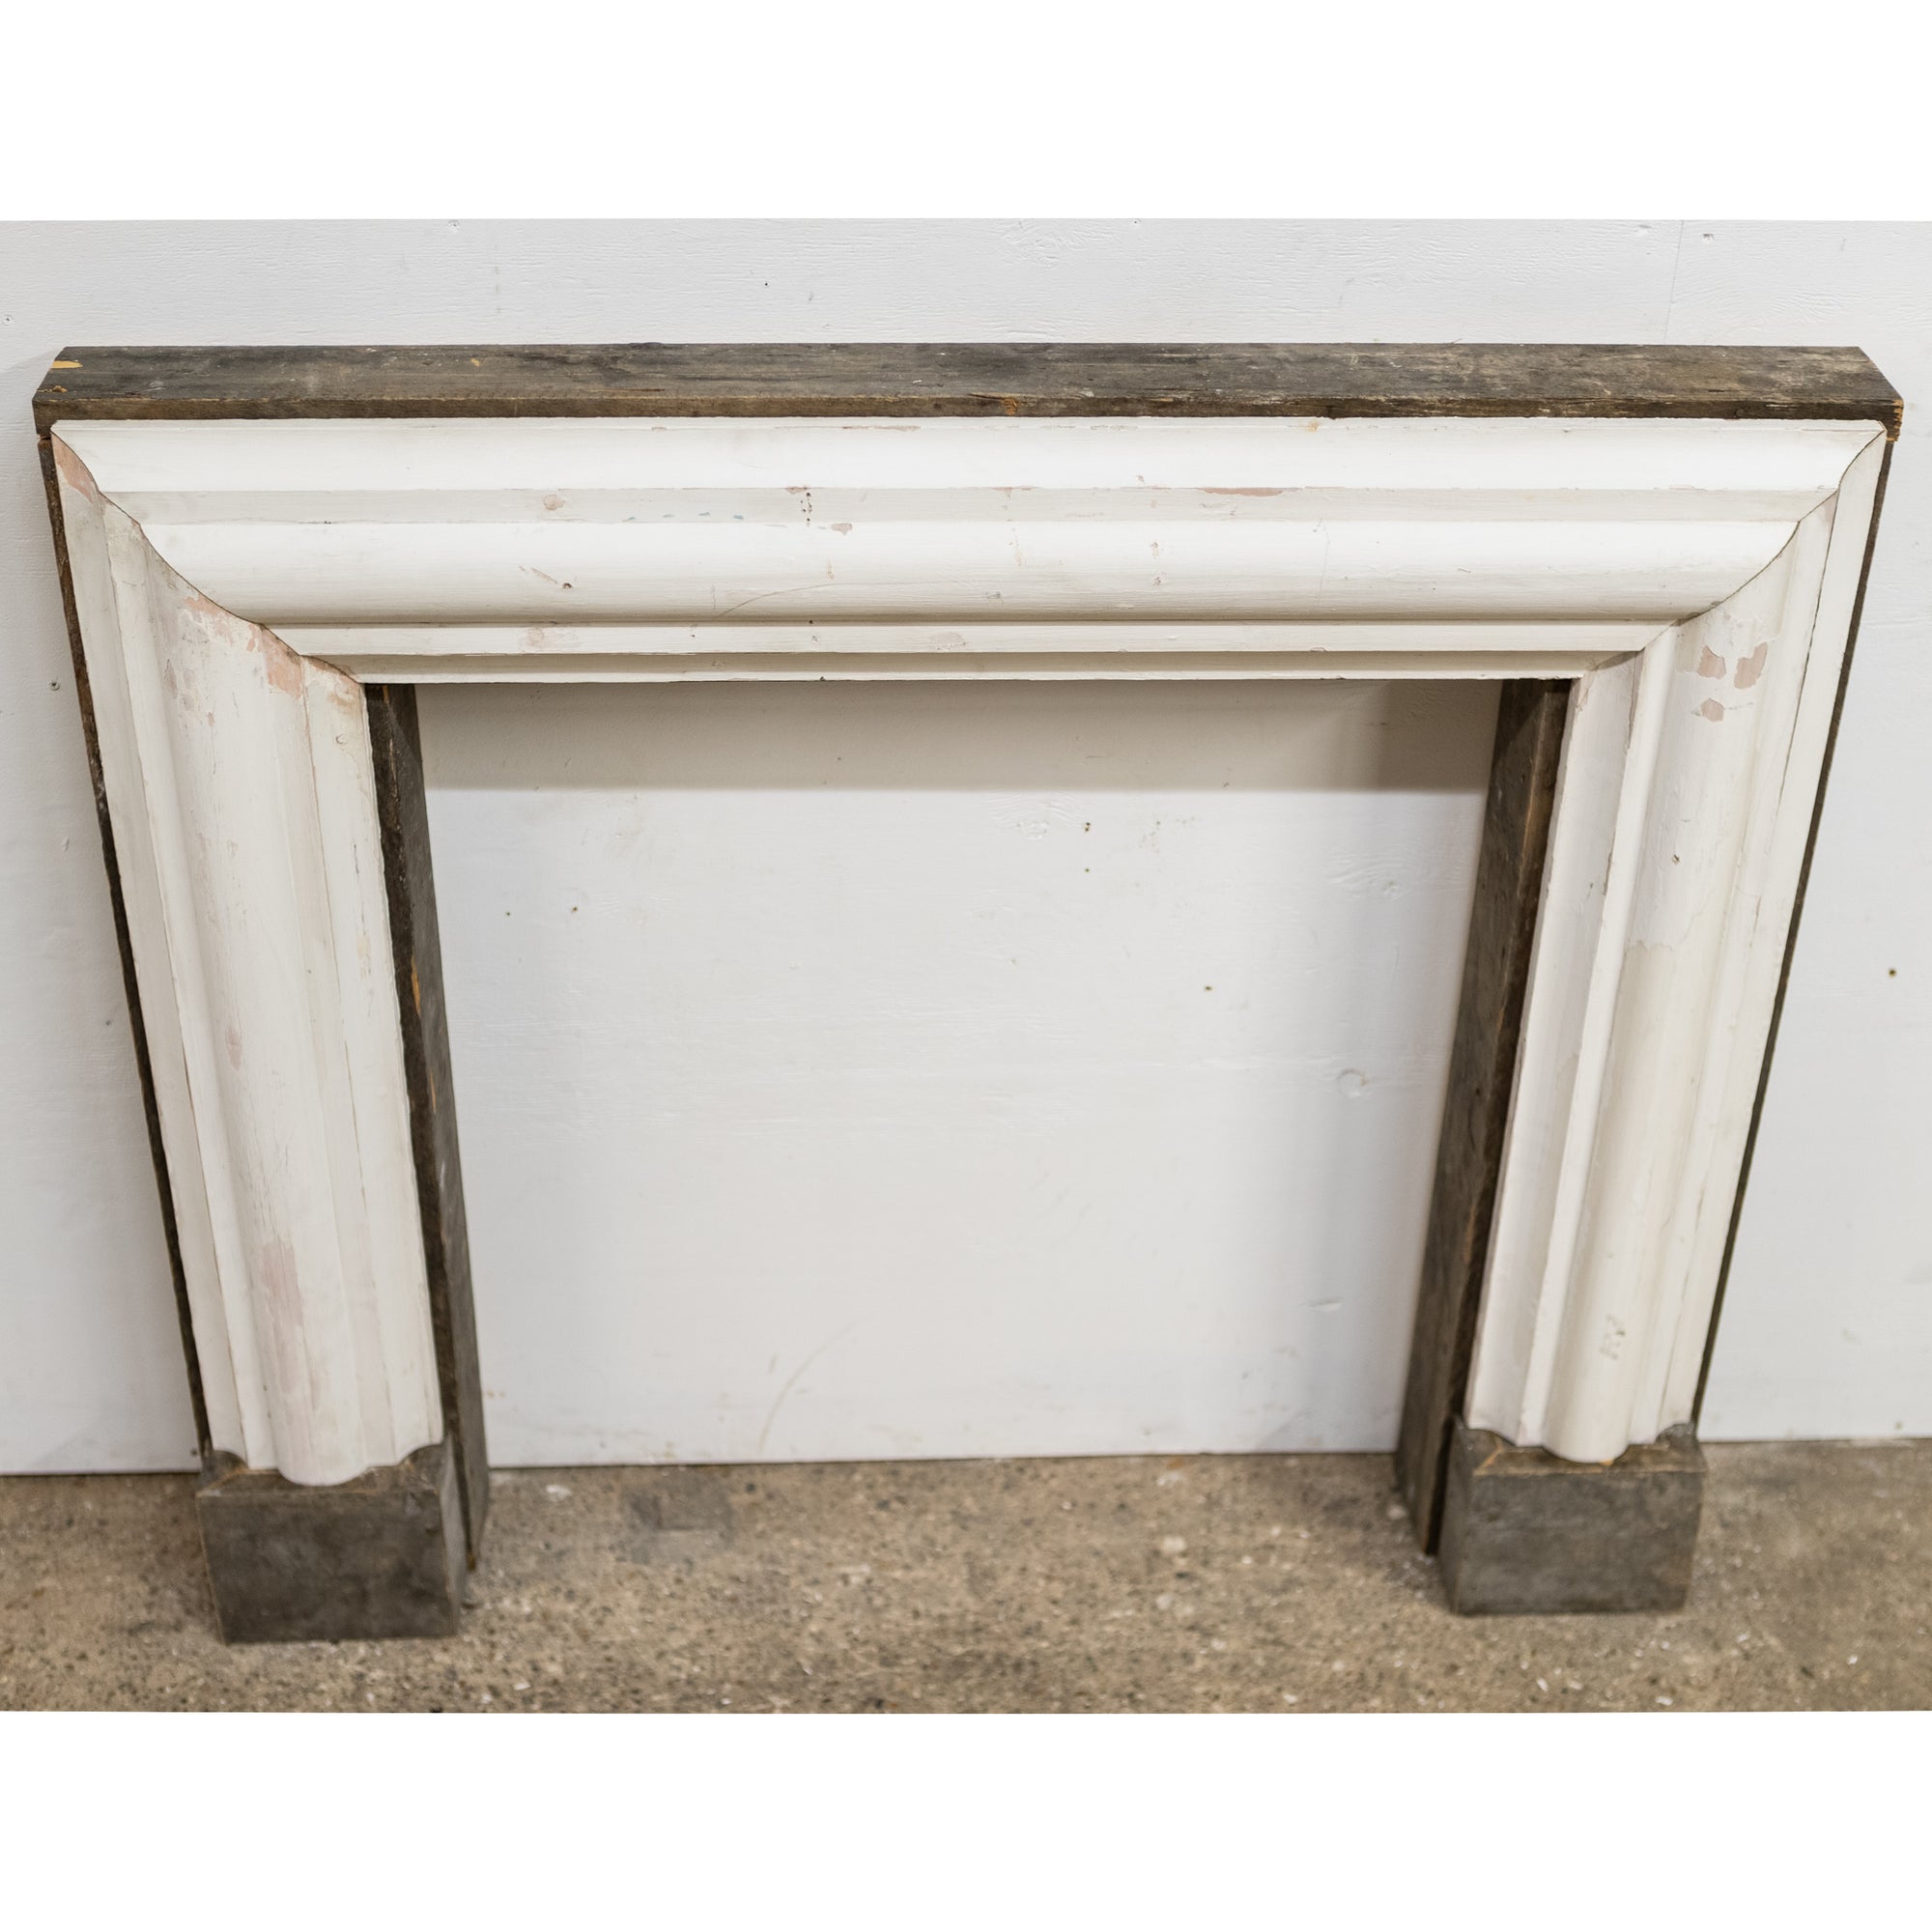 Bolection Fireplace Surround Crafted from Reclaimed Timber | The Architectural Forum